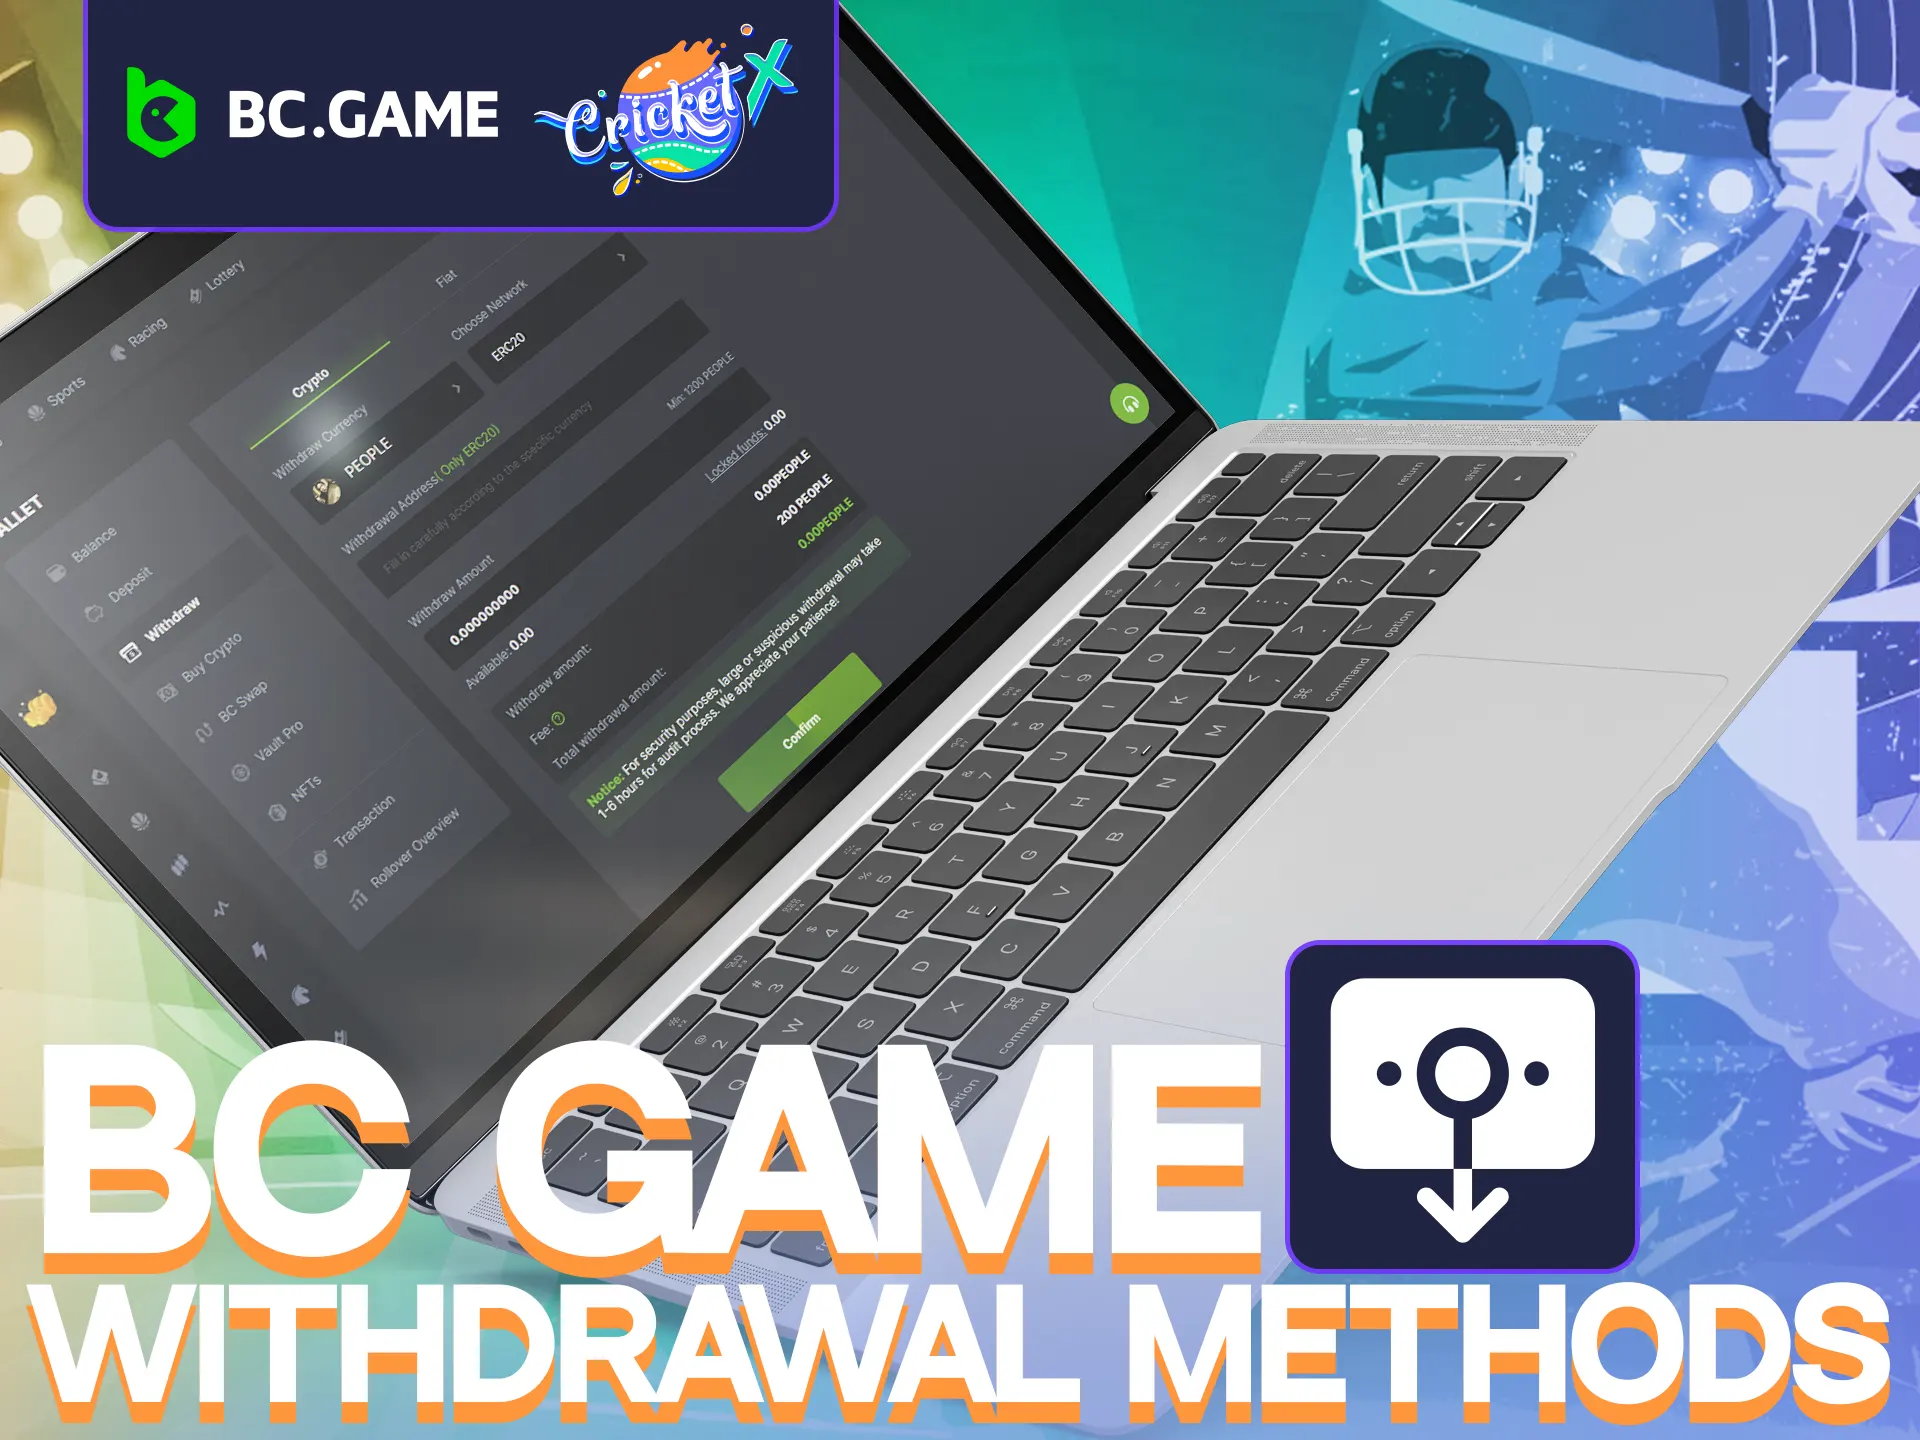 Explore BC.GAME withdrawal methods, and start playing Cricket X.